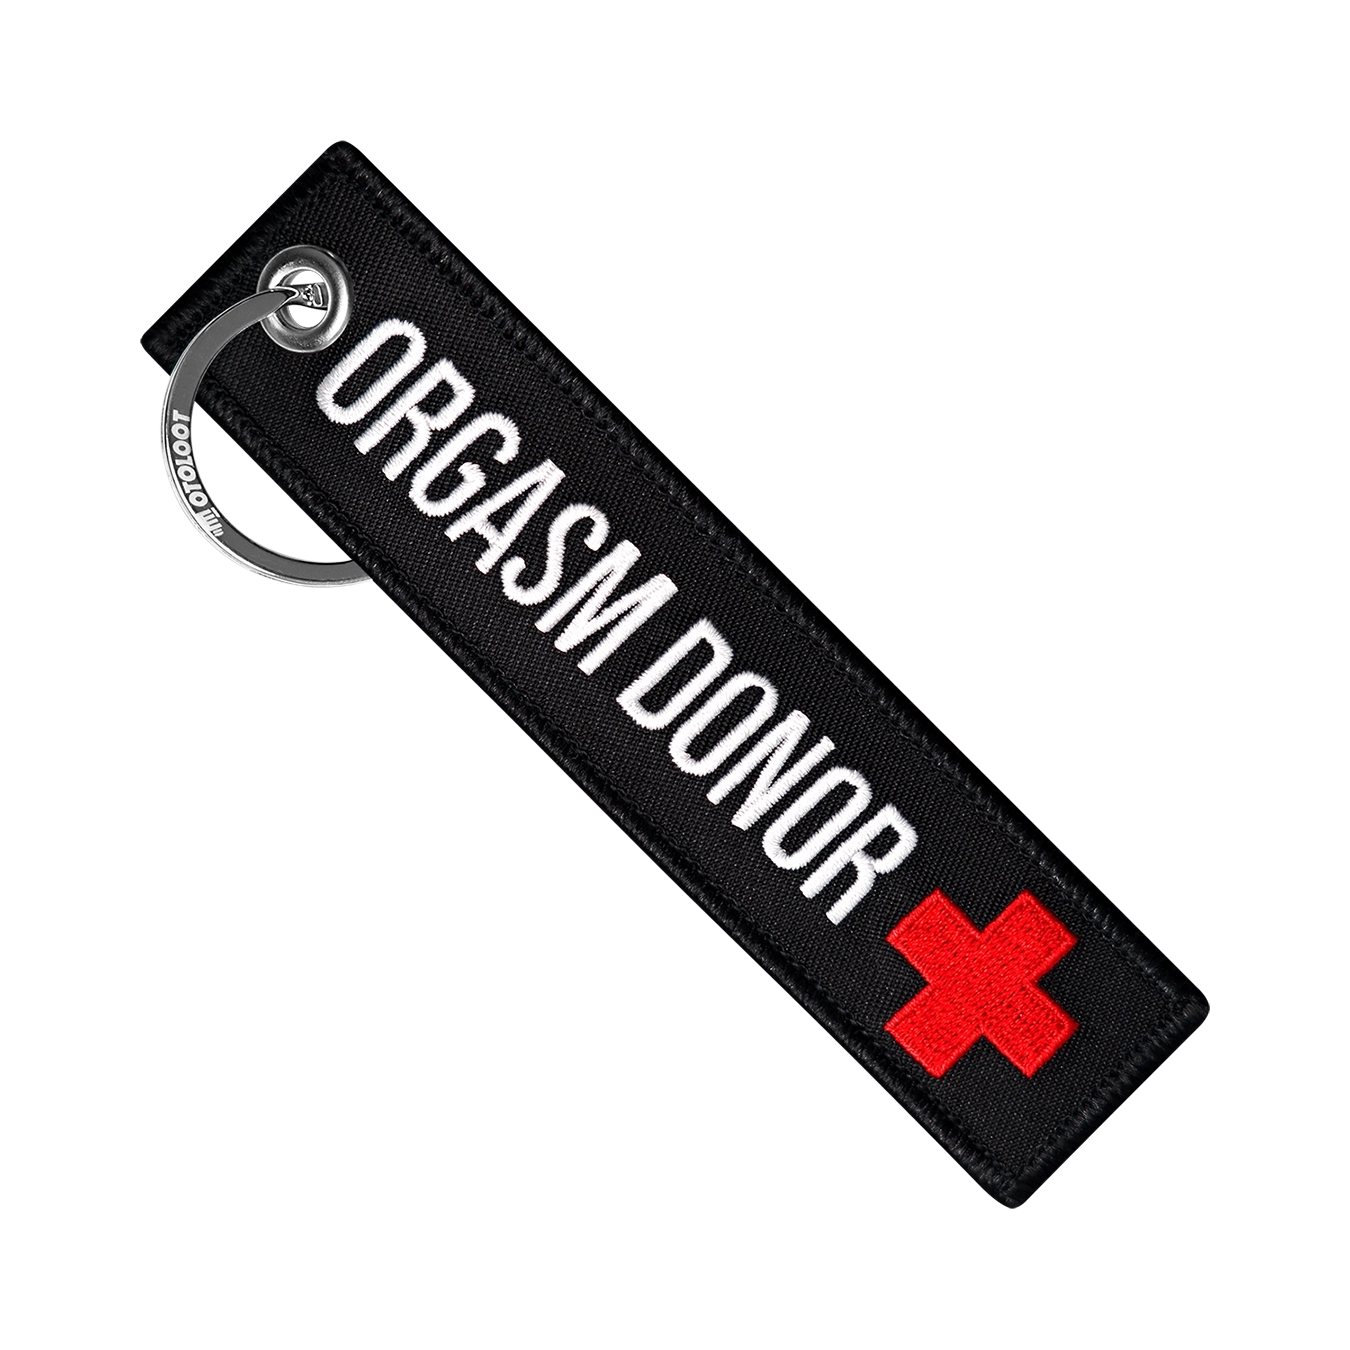 Orgasm Donor - Motorcycle Keychain